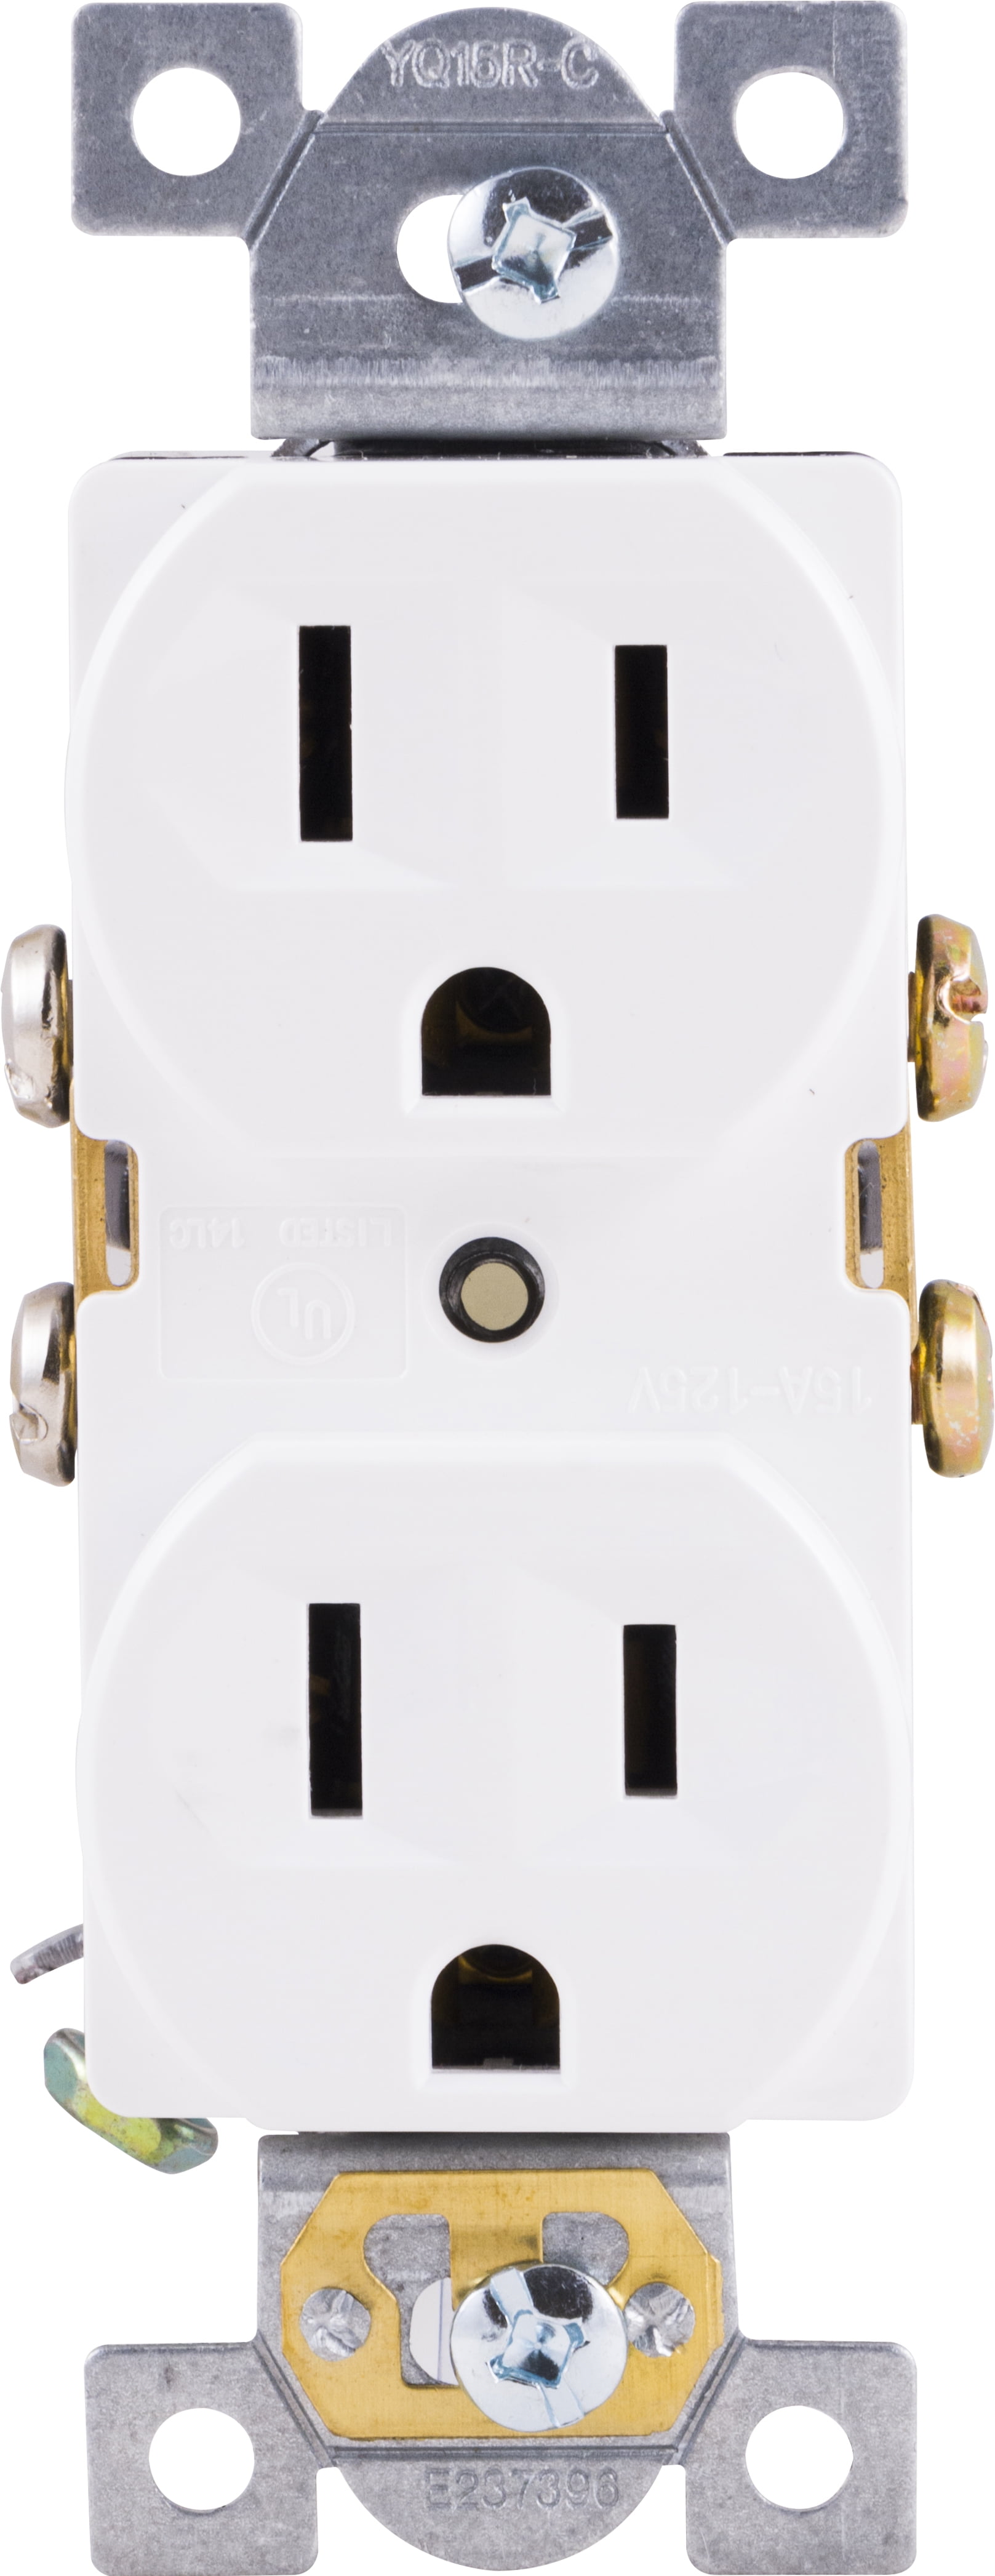 GENERAL ELECTRIC UltraPro Heavy-Duty Grounding Duplex Receptacle Outlet, 42157